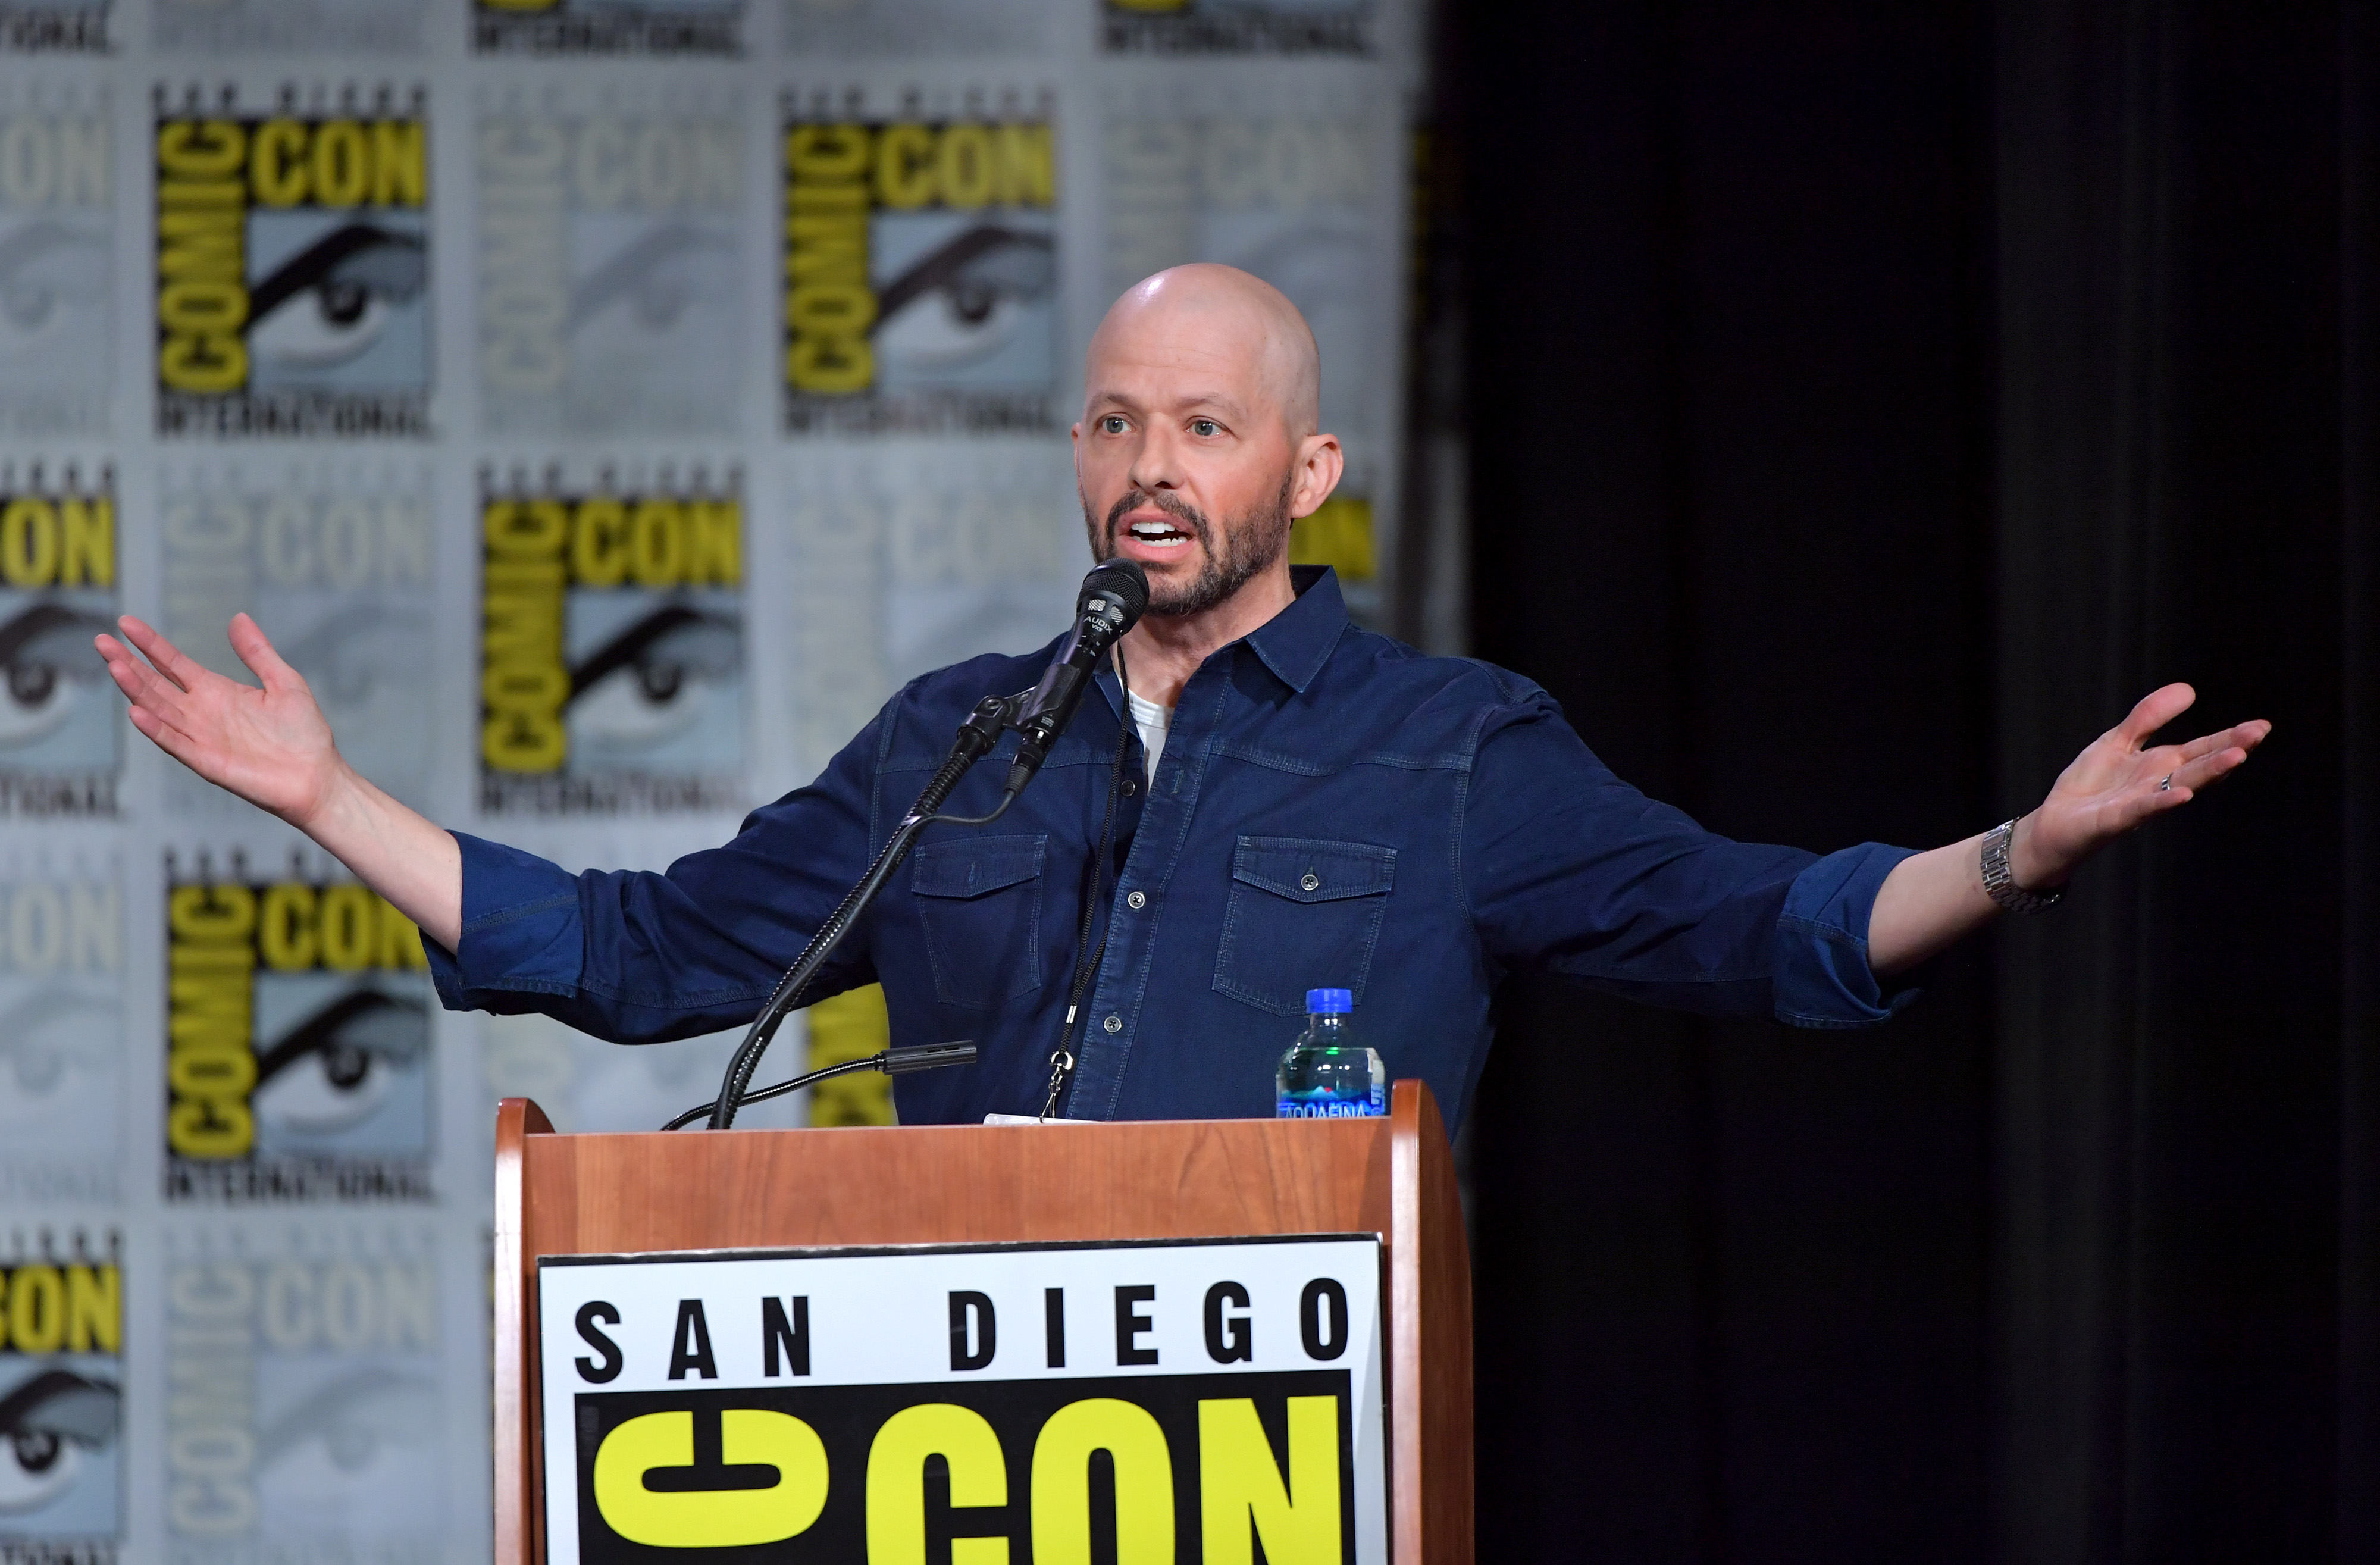 'Supergirl' actor Jon Cryer, who plays Lex Luthor, wears a dark blue jean button-down long-sleeved jacket and stands in front of a San Diego Comic-Con speaking podium.